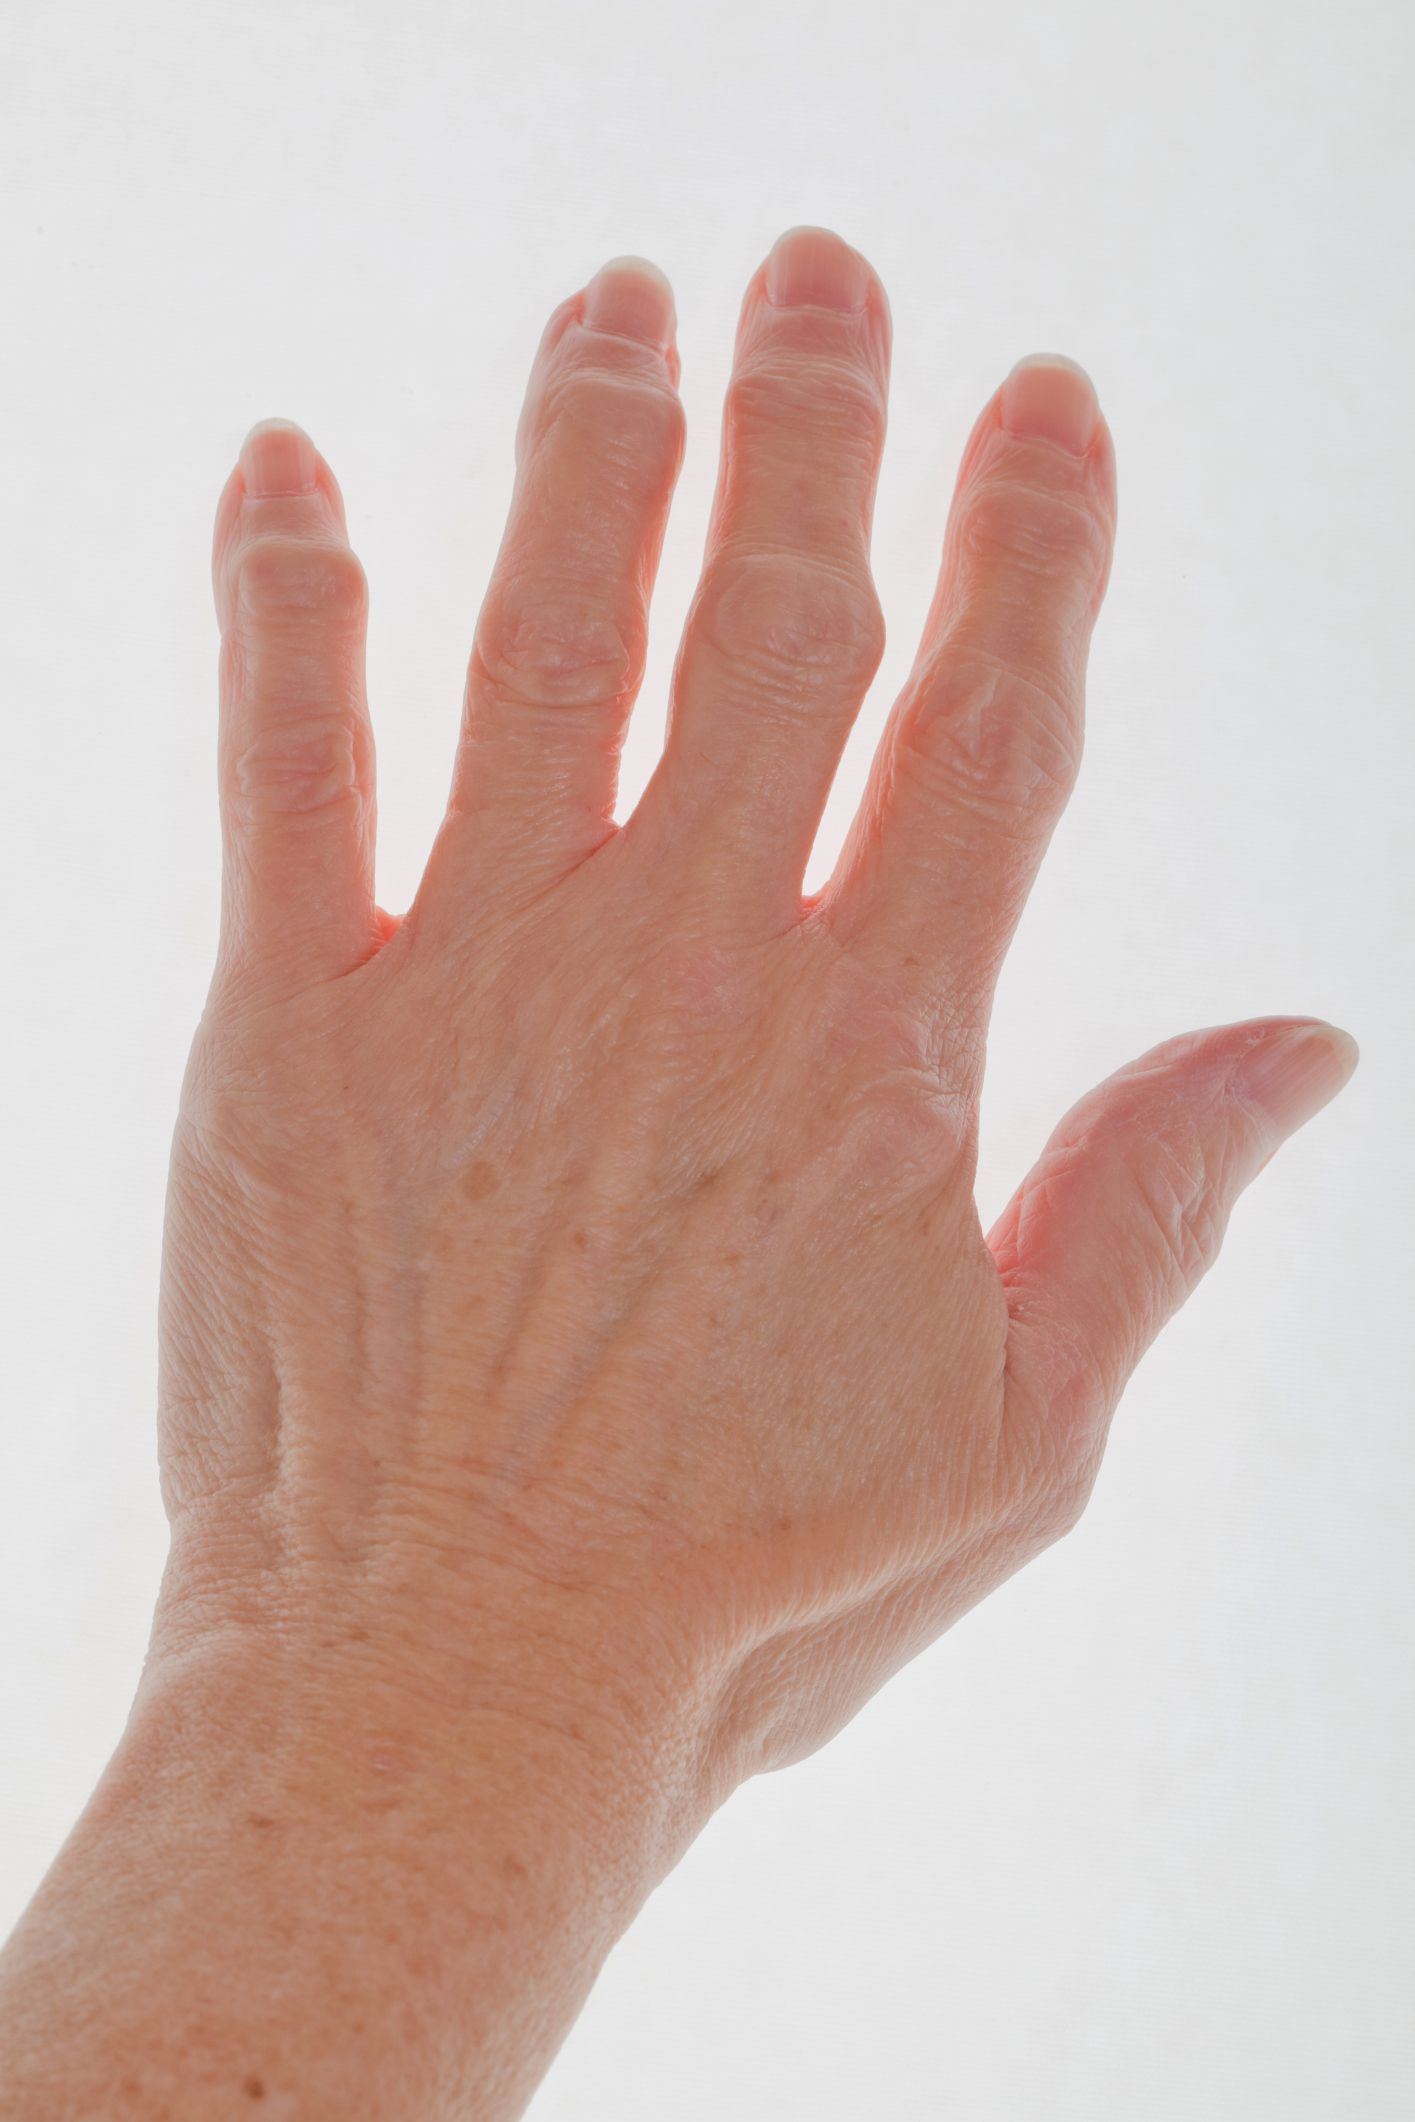 Finger Arthritis: Signs, Symptoms, and Treatment